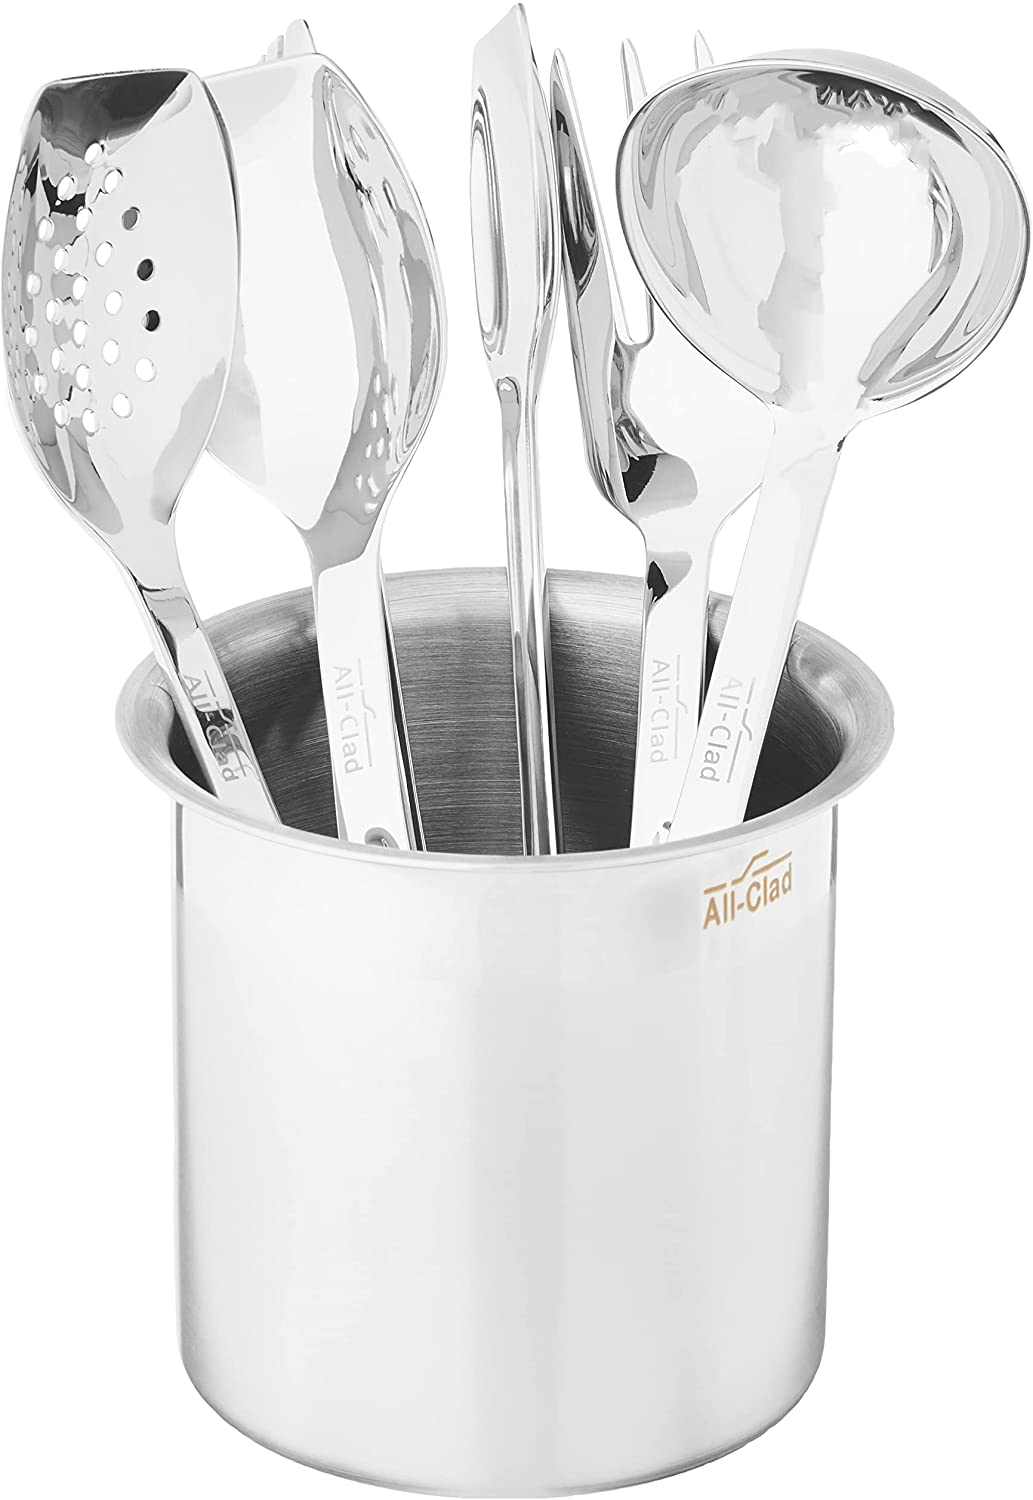 All-Clad Stainless Steel 6-Piece Cook Serve Tool Set